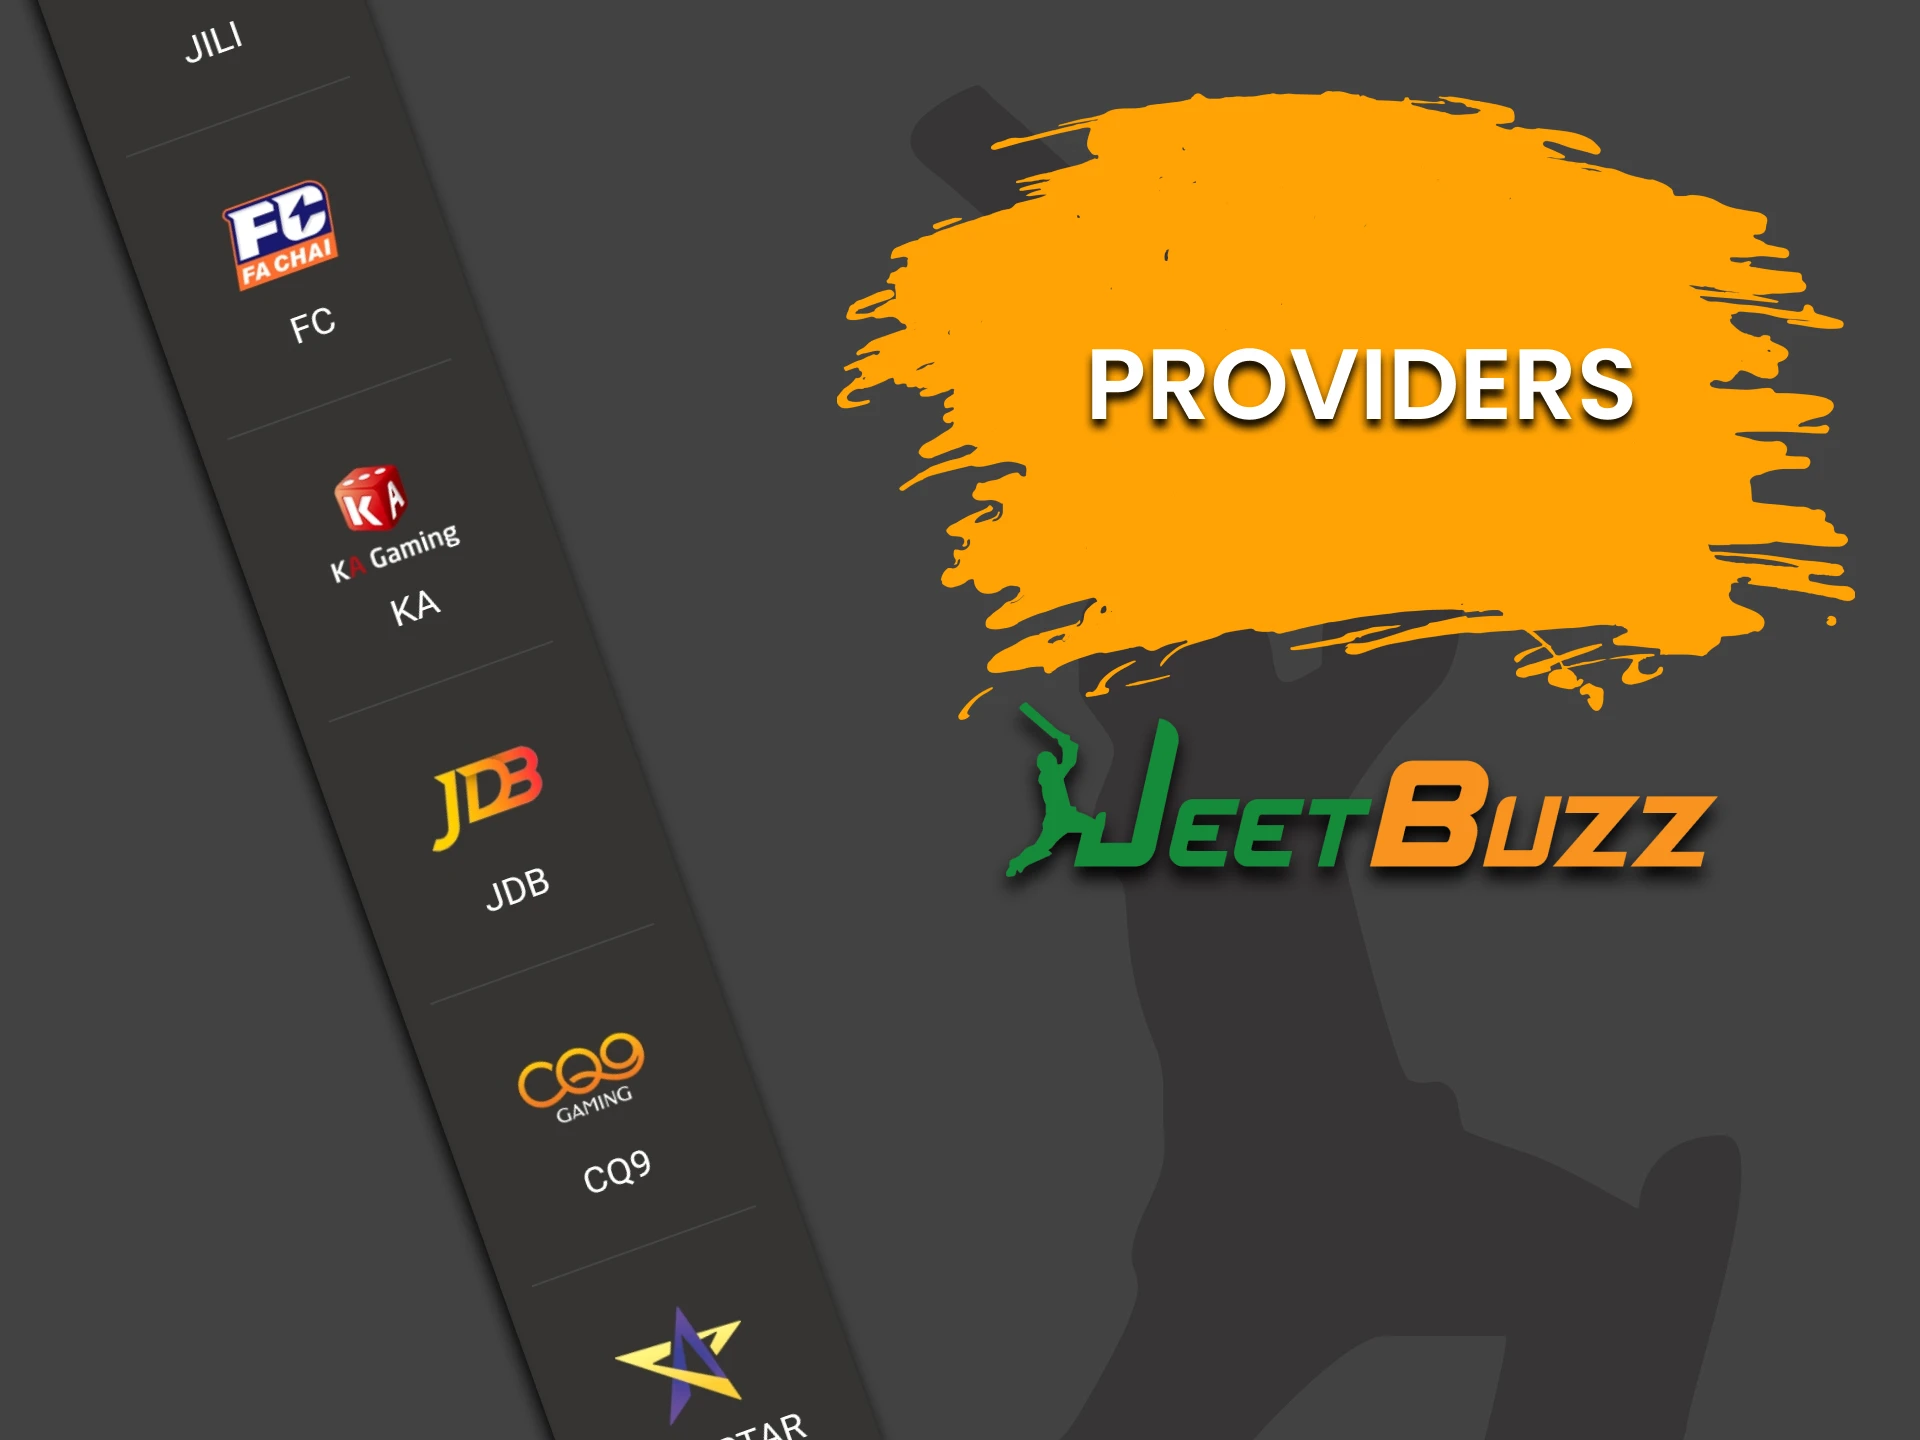 We will talk about providers for the Fishing section of JeetBuzz.